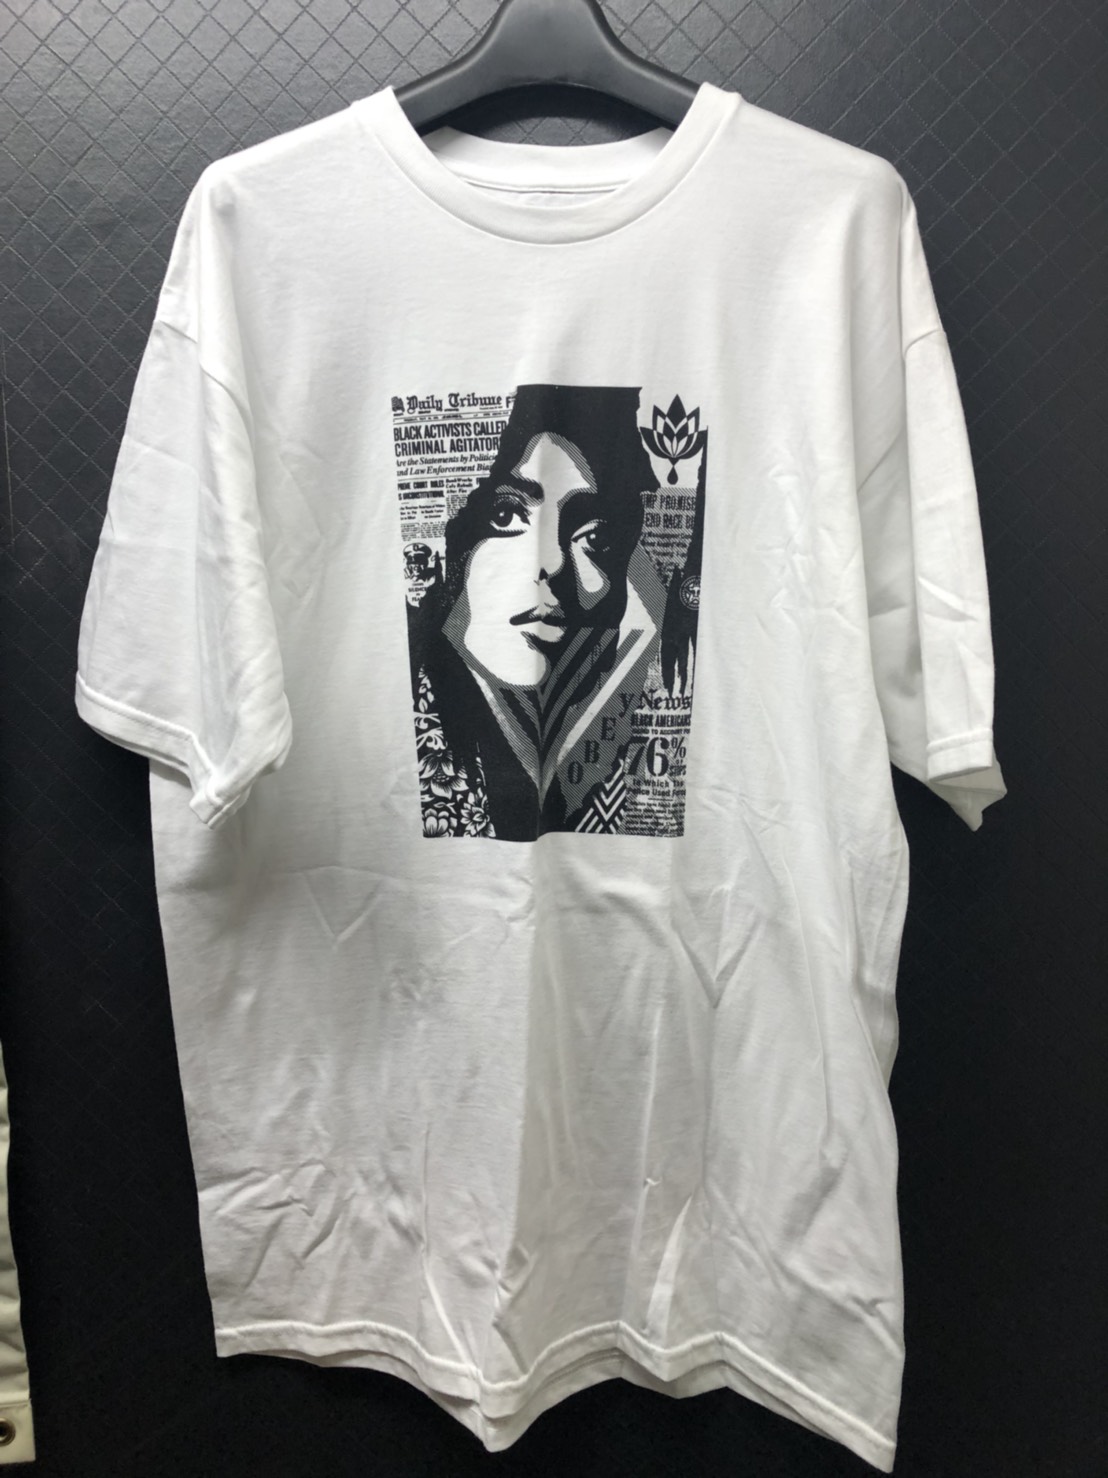 OBEY BIAS BY NUMBERS WHITE T-SHIRT